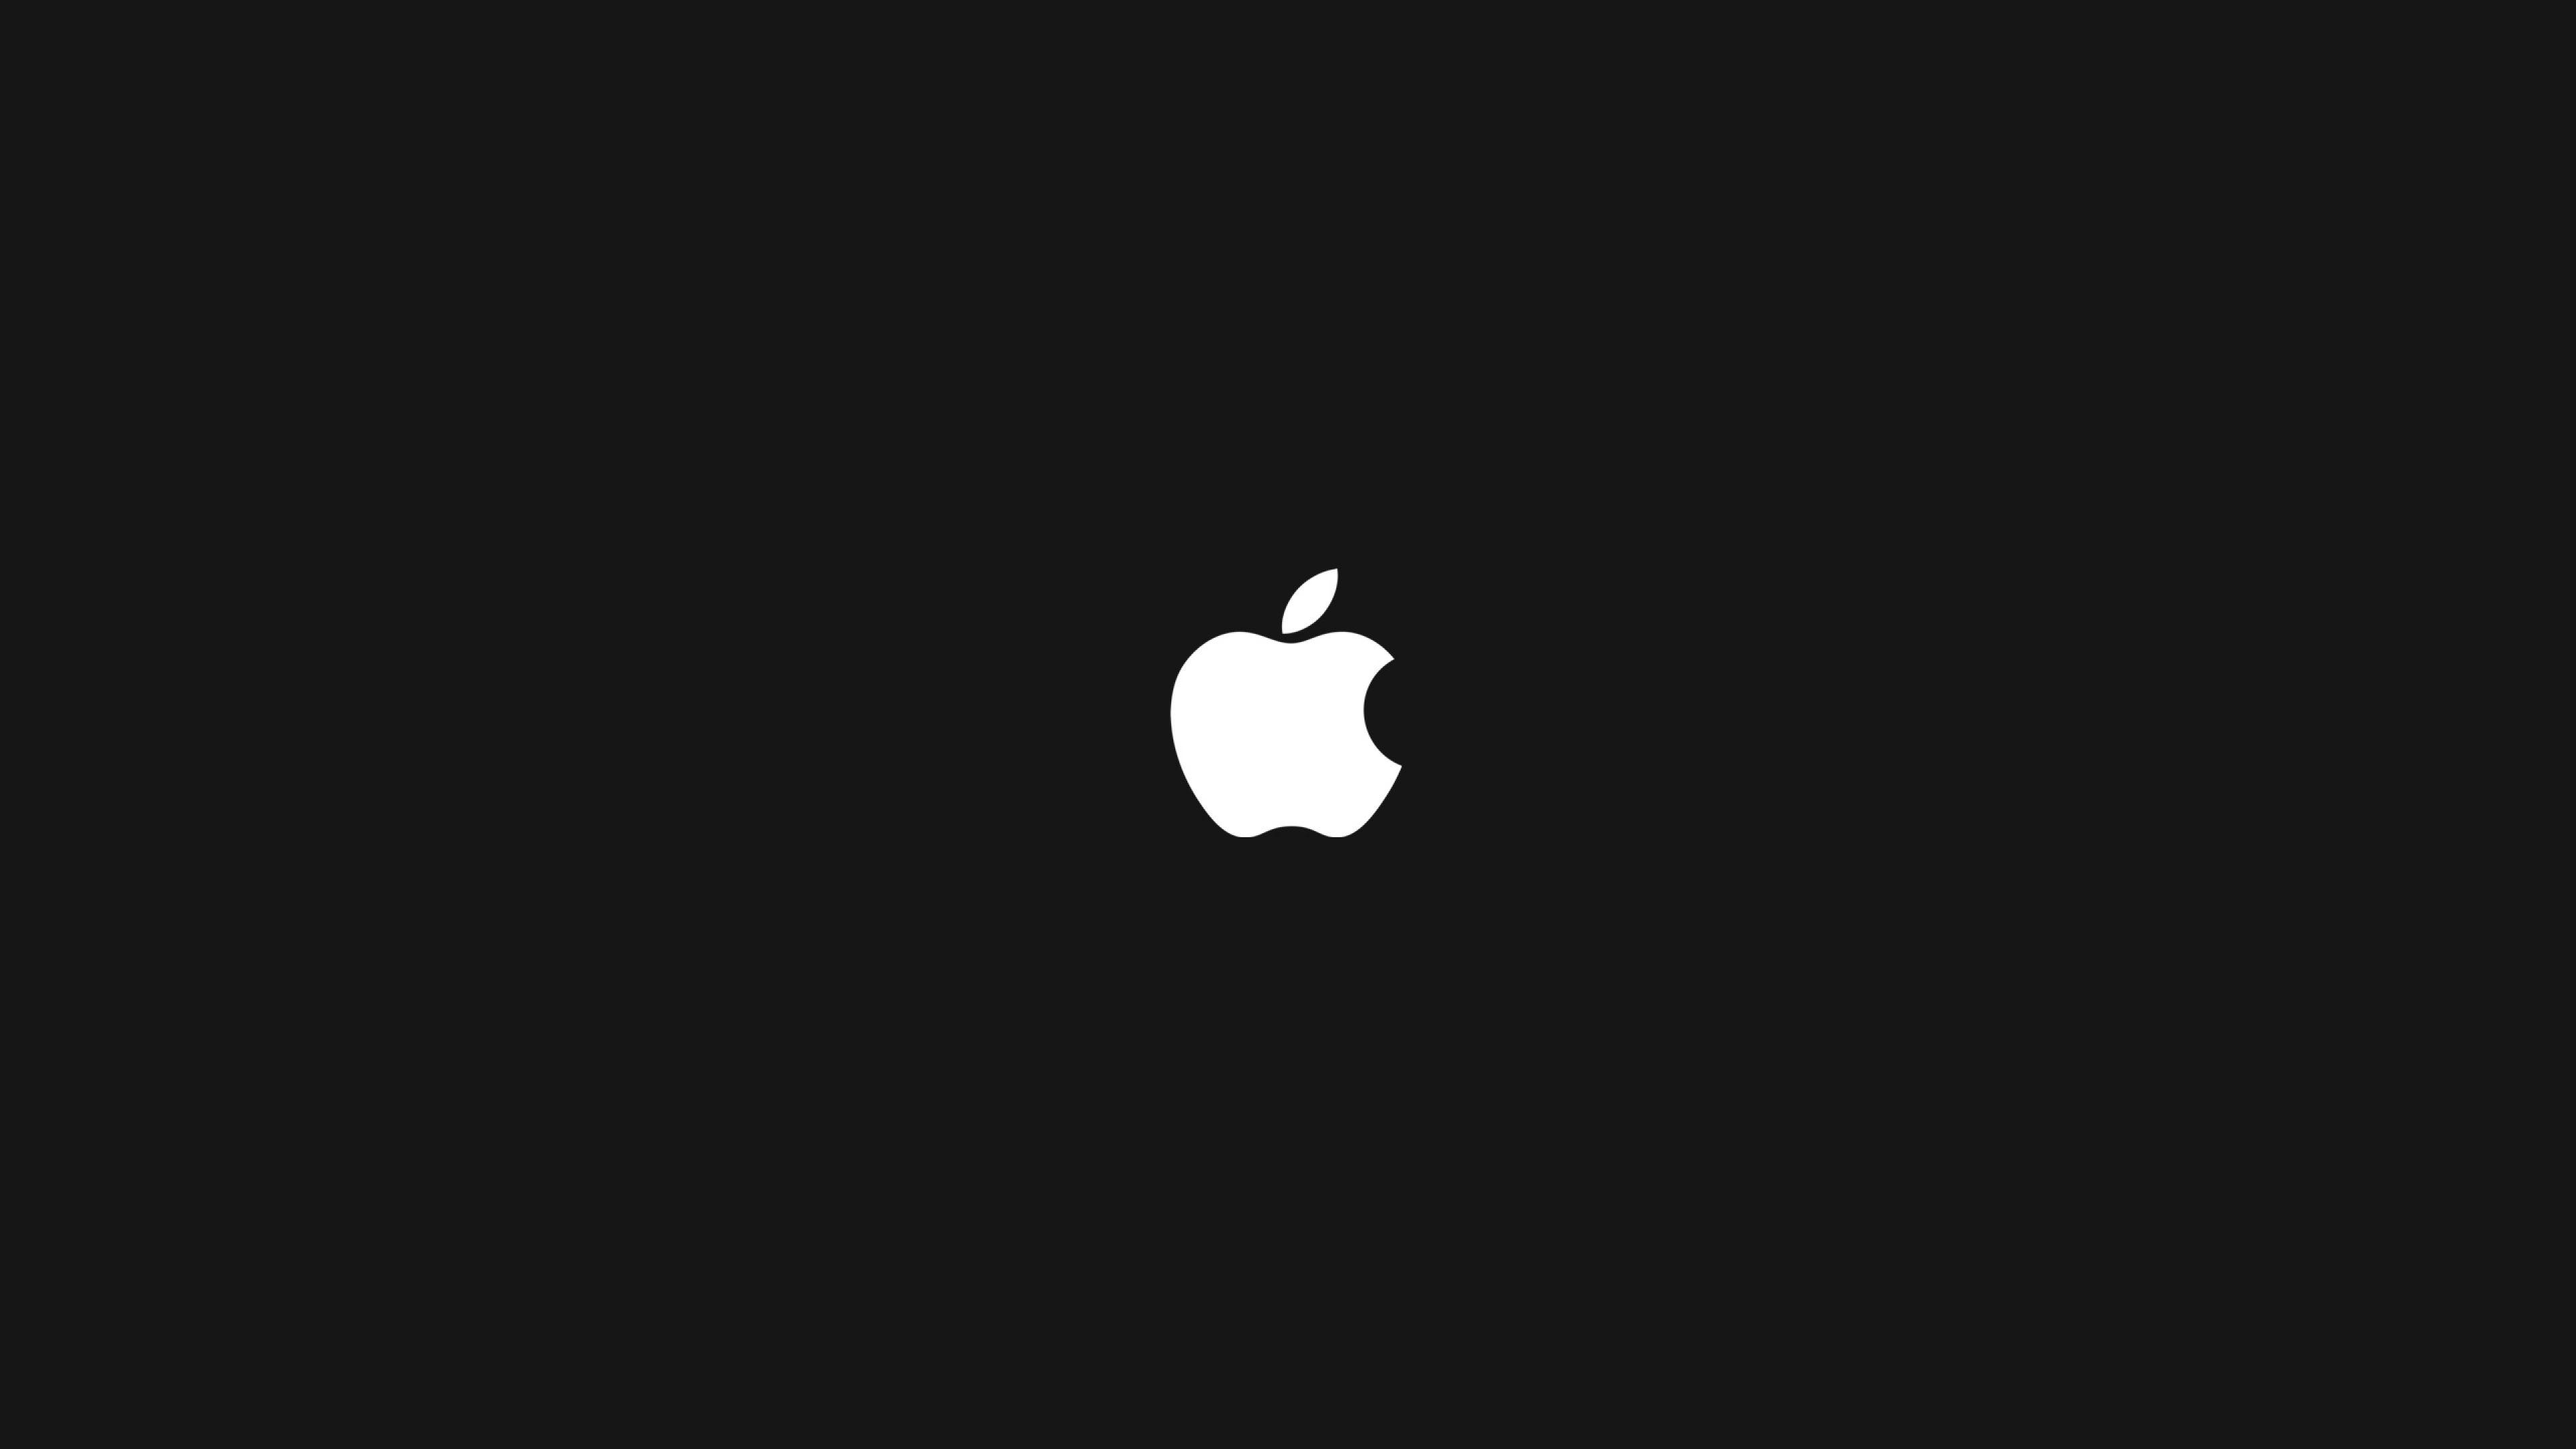 Apple 4K Phone Wallpapers - Top Free Apple 4K Phone Backgrounds